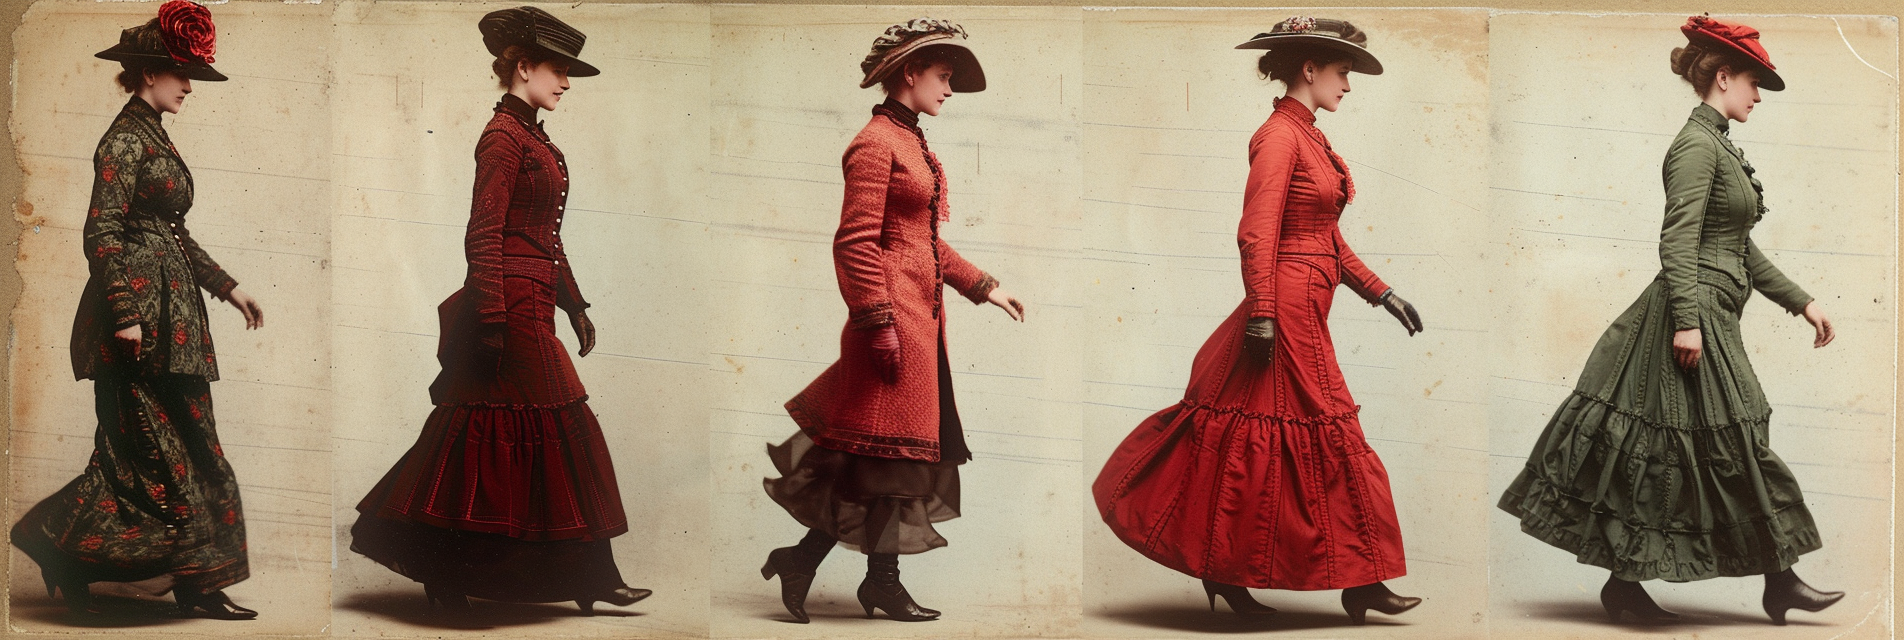 A Century of Elegance: The Evolution of Women's Fashion Over the Last 100 Years